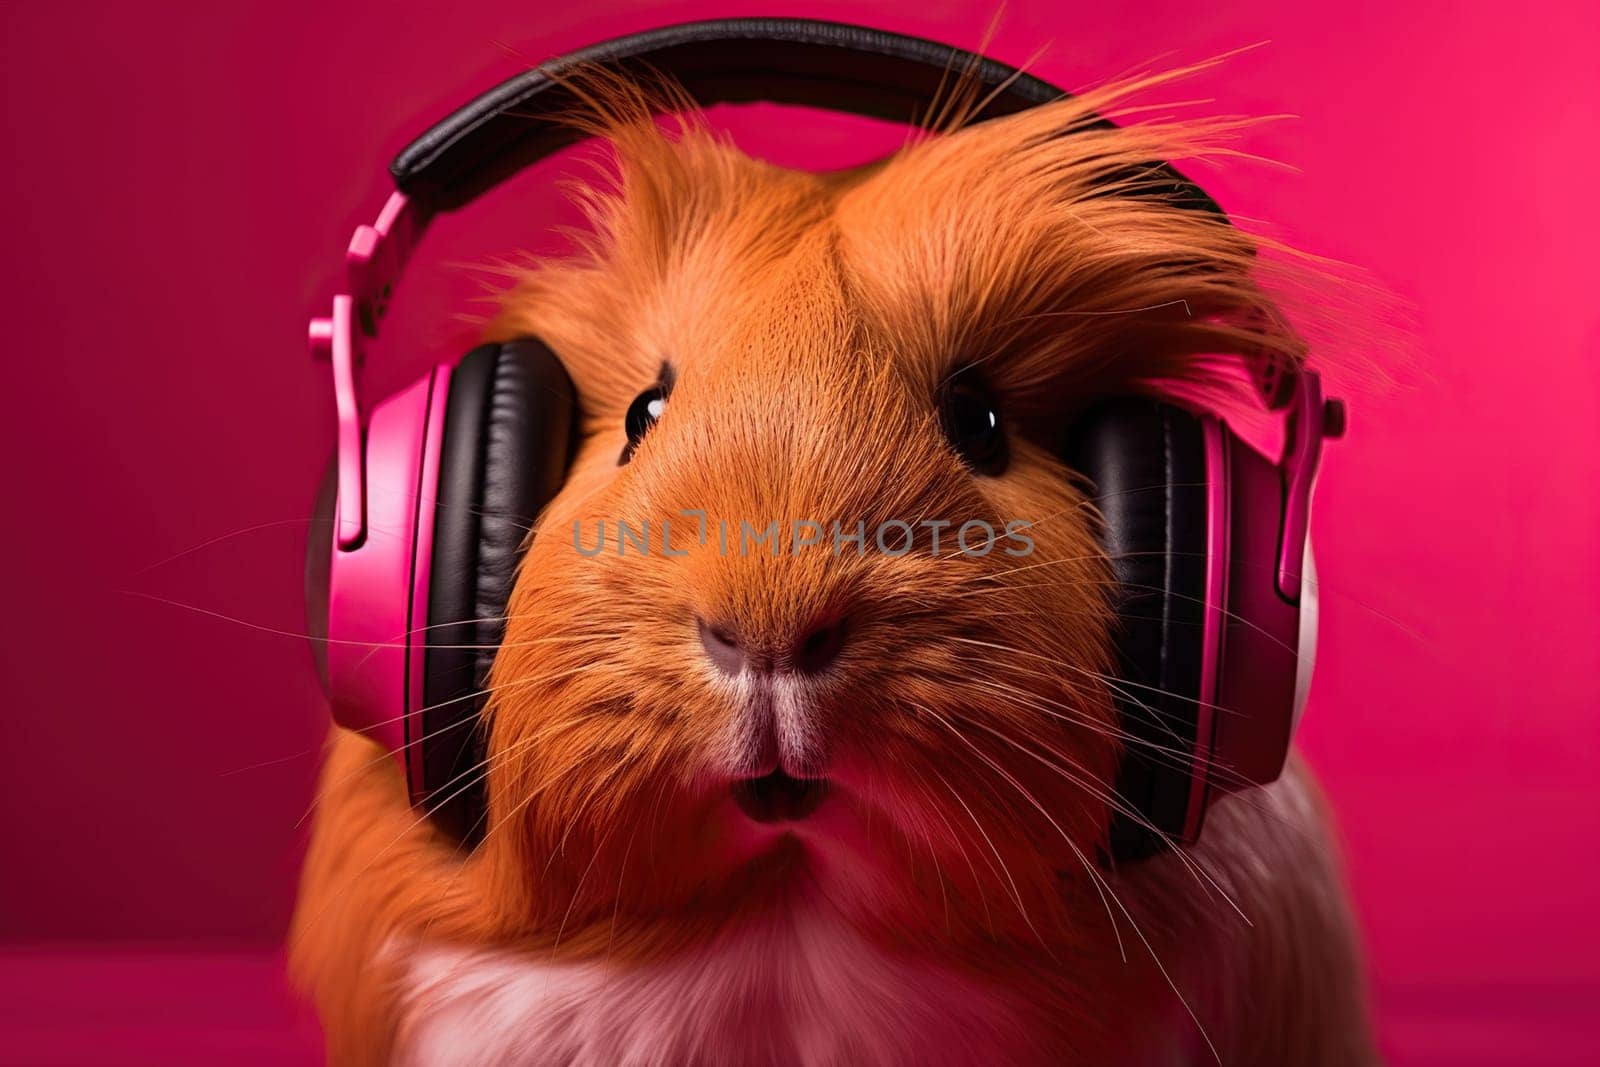 Adorable Guinea Pig Wearing Headphones Against A Deep Red Background